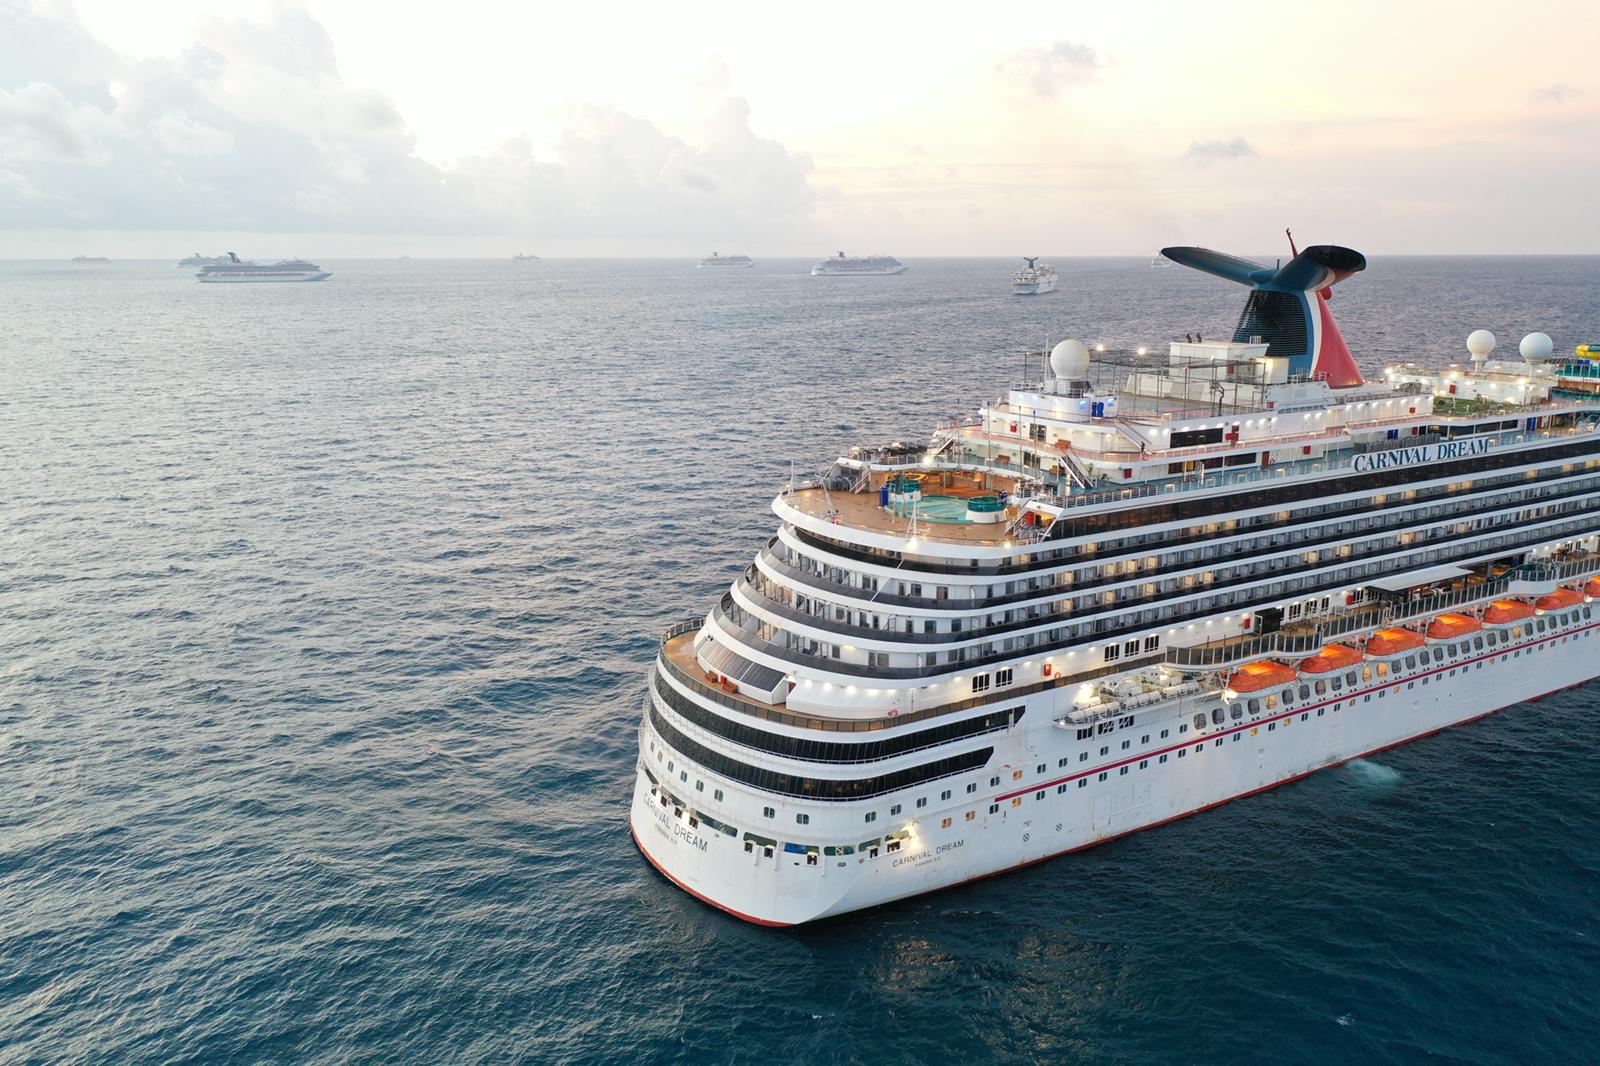 Carnival Dream at sea with other ships in background